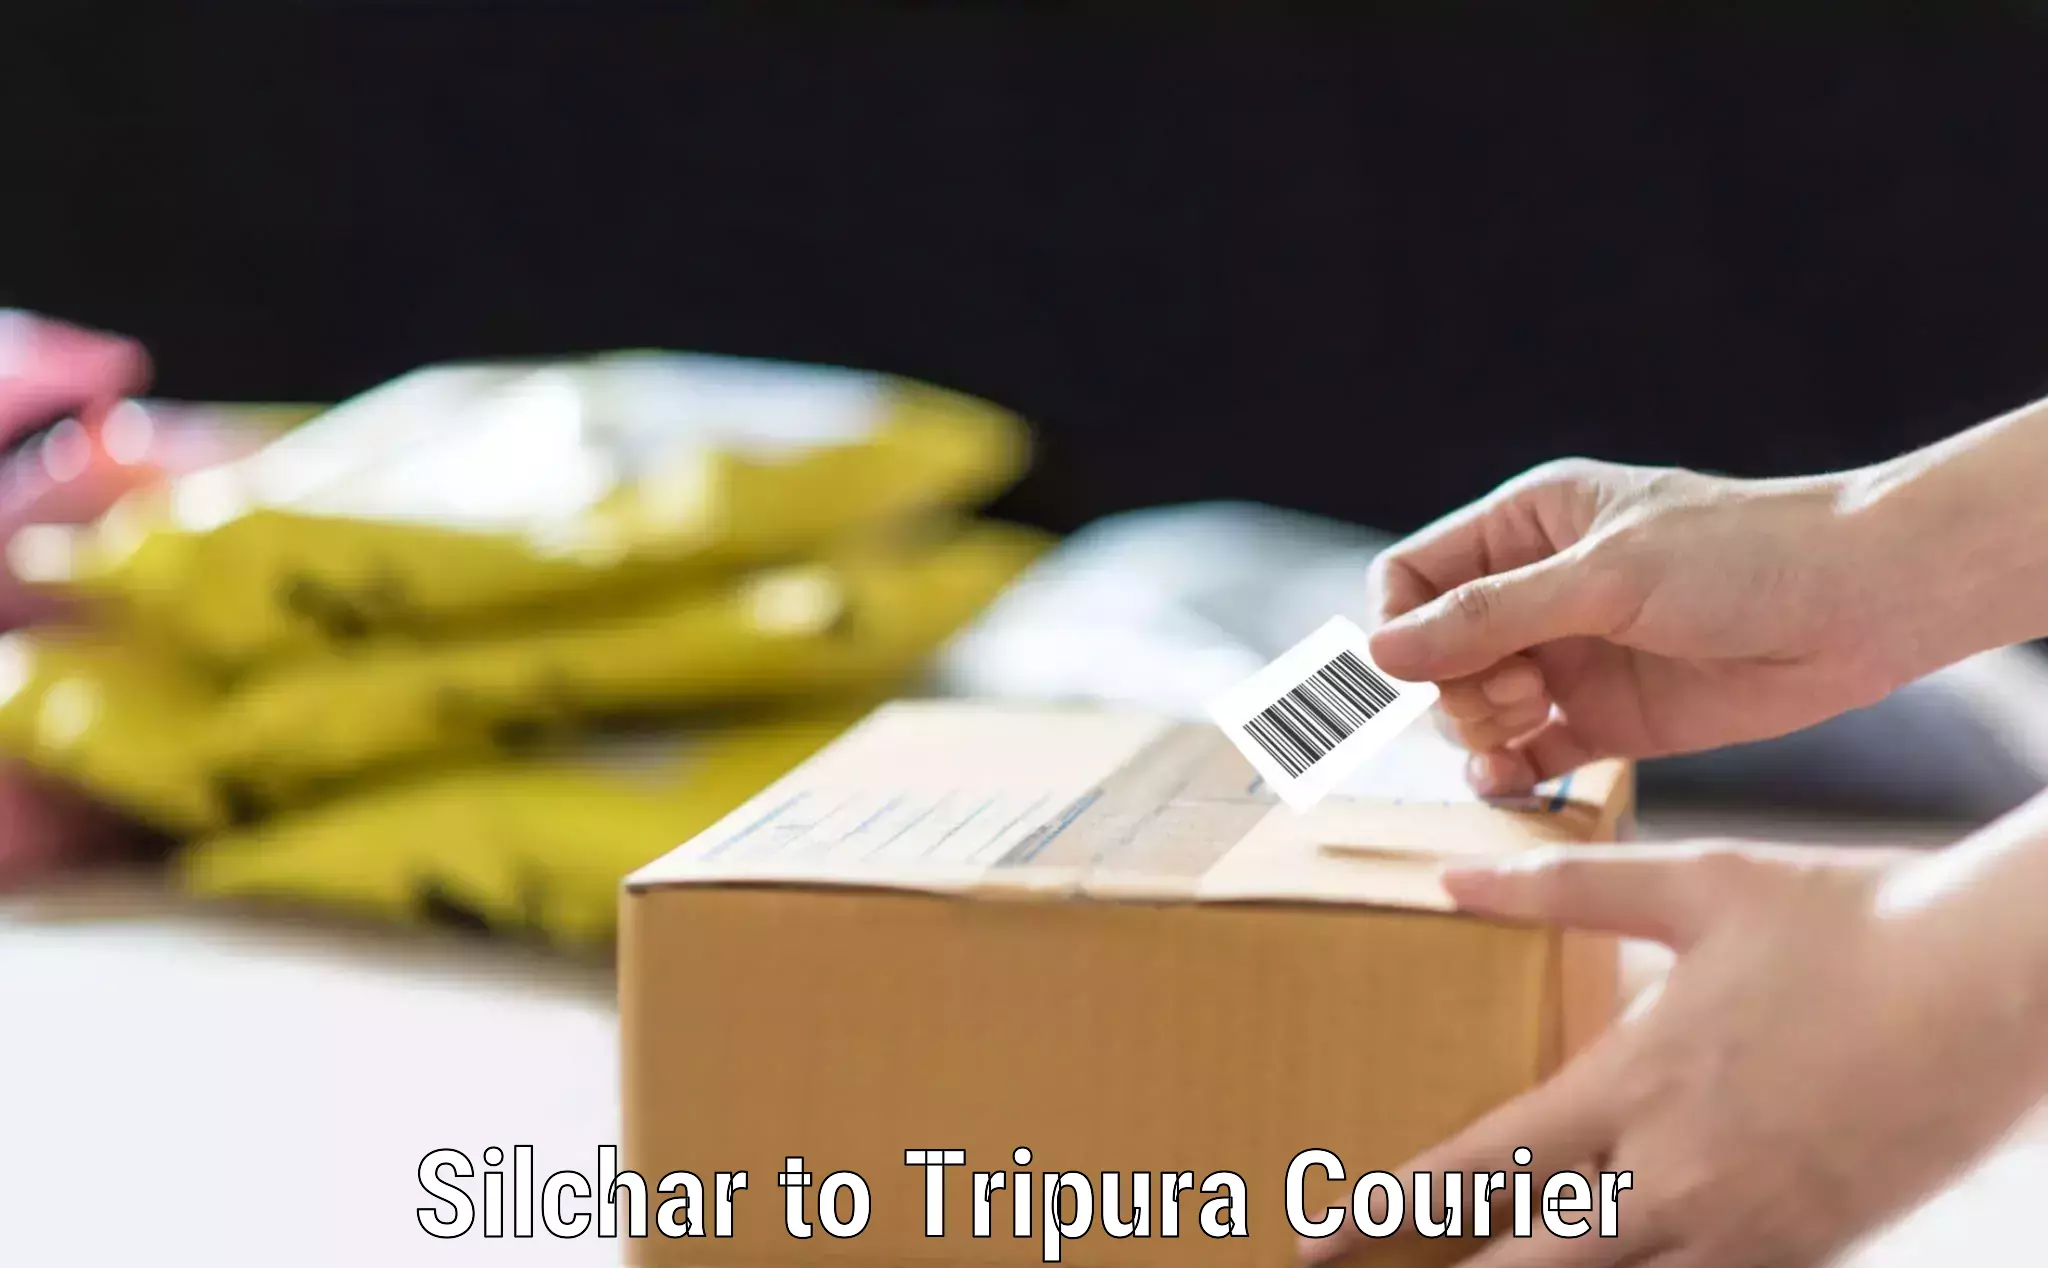 Luggage transport consultancy Silchar to Tripura